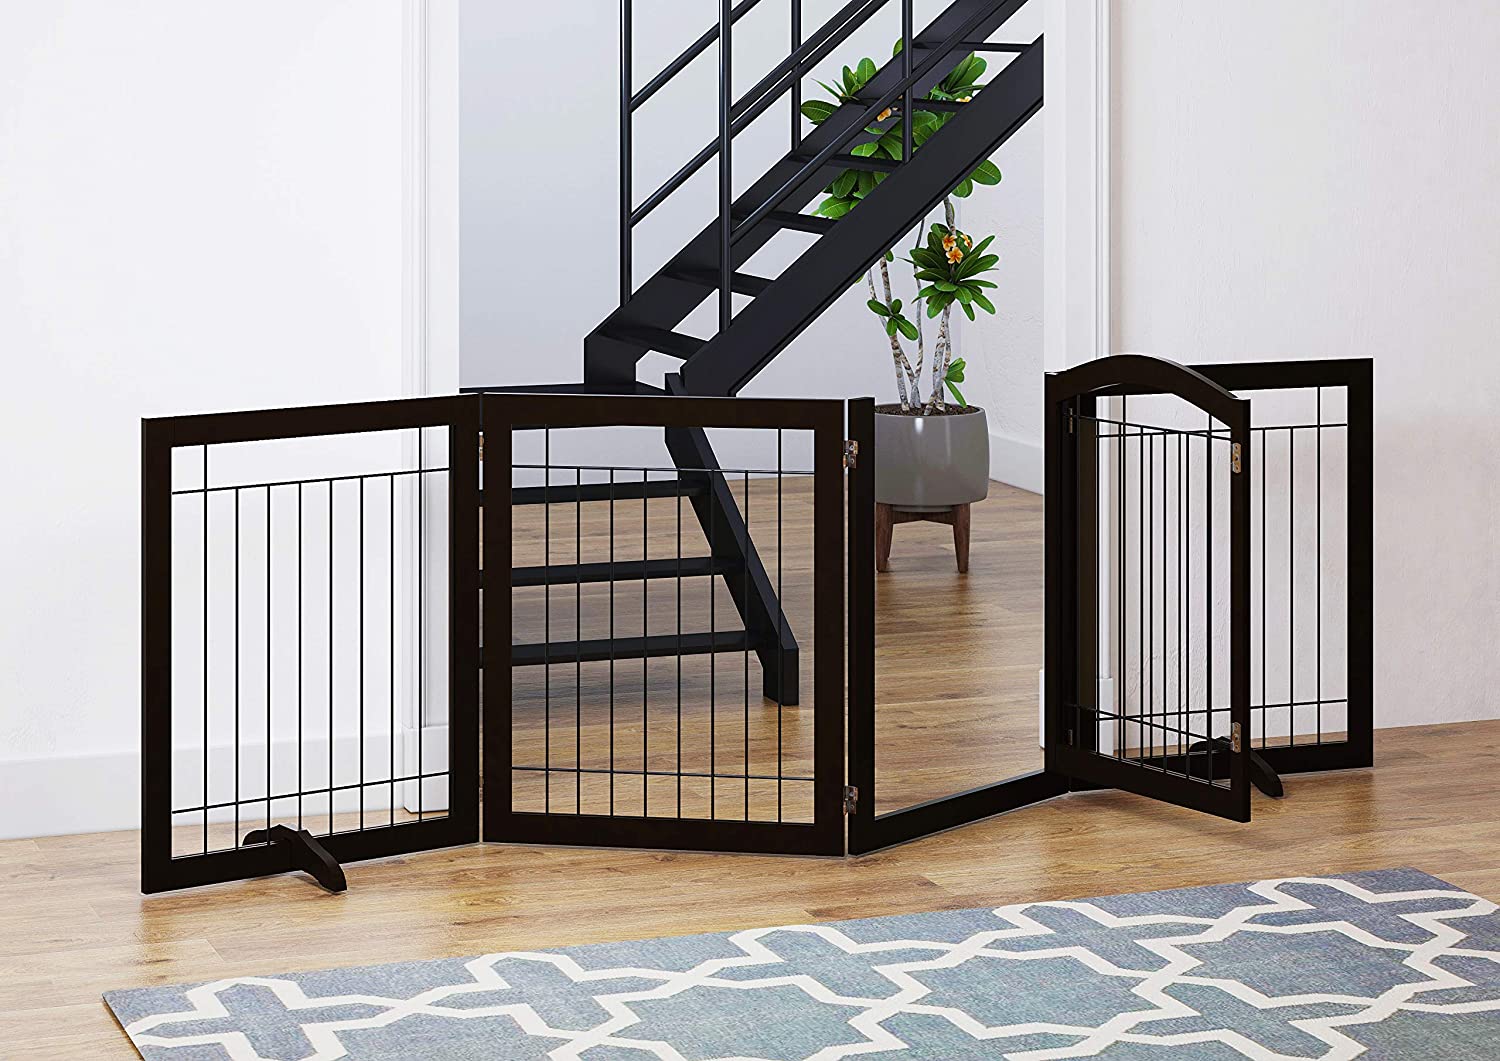 PAWLAND 96-inch Extra Wide 30-inches Tall Dog gate with Door Walk Through, Freestanding Wire Pet Gate for The House, Doorway, Stairs, Pet Puppy Safety Fence, Support Feet Included(Espresso) - image 2 of 6